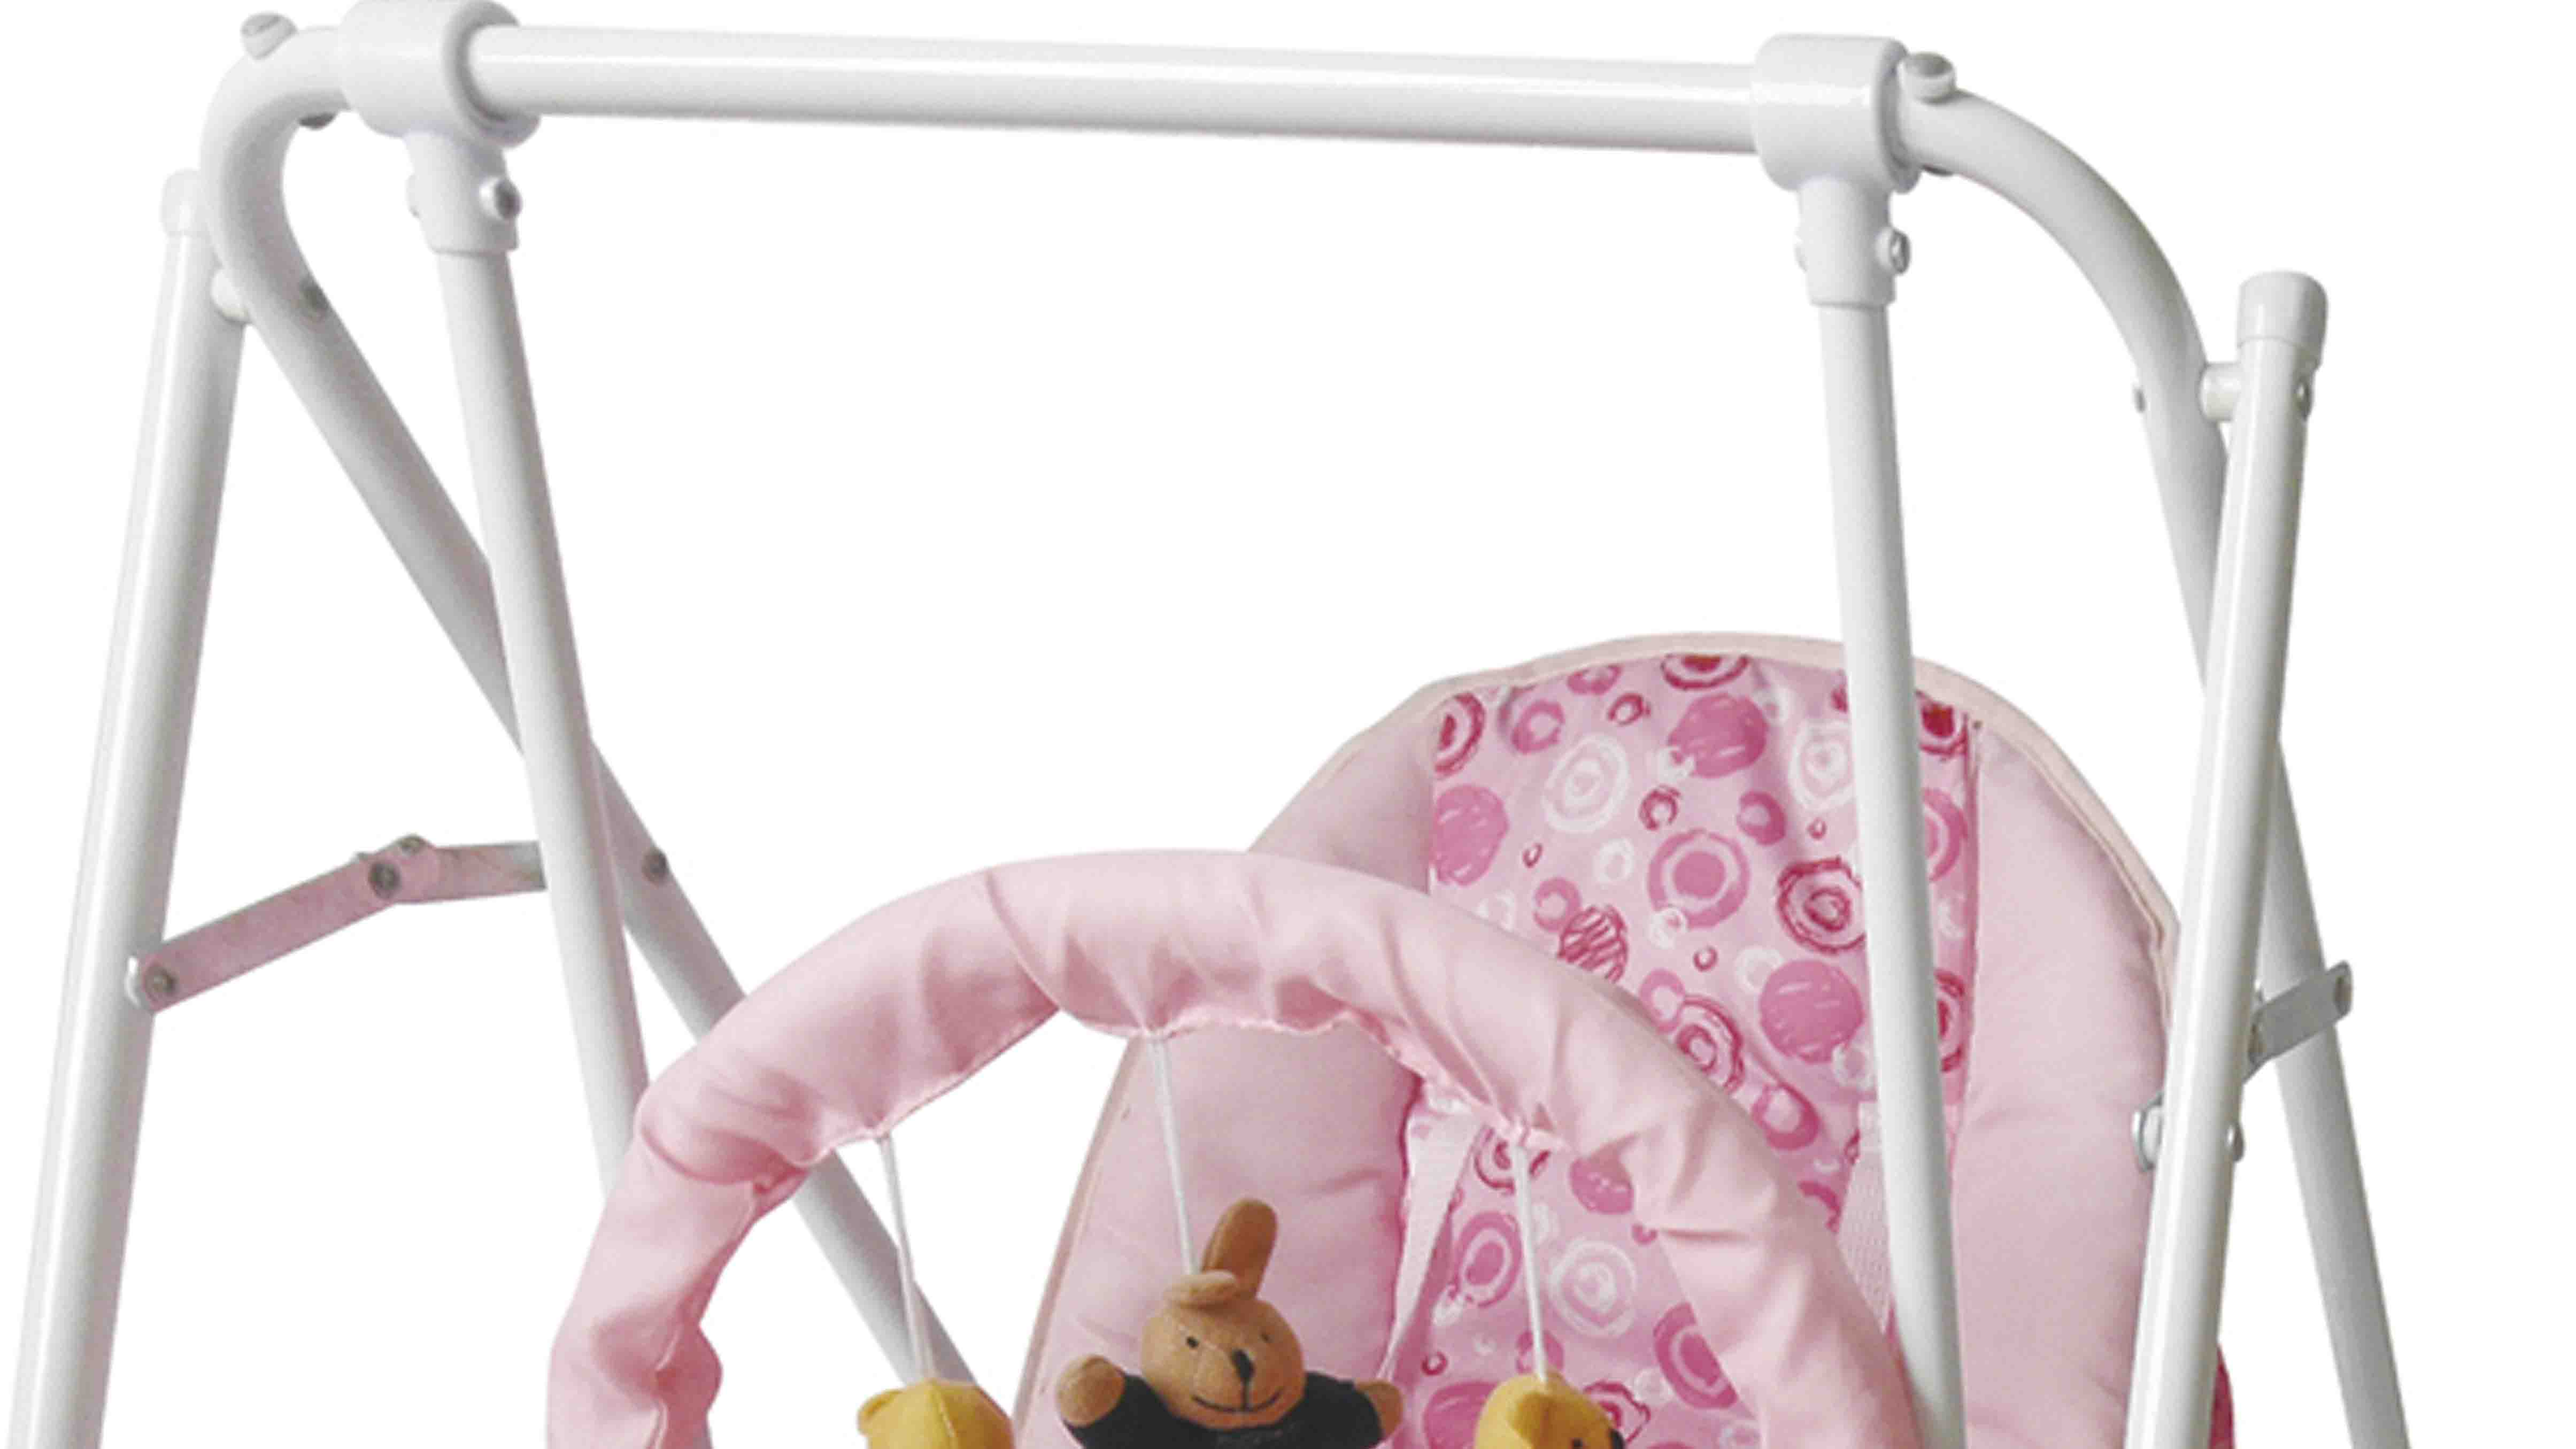 double seat babies swing factory for household